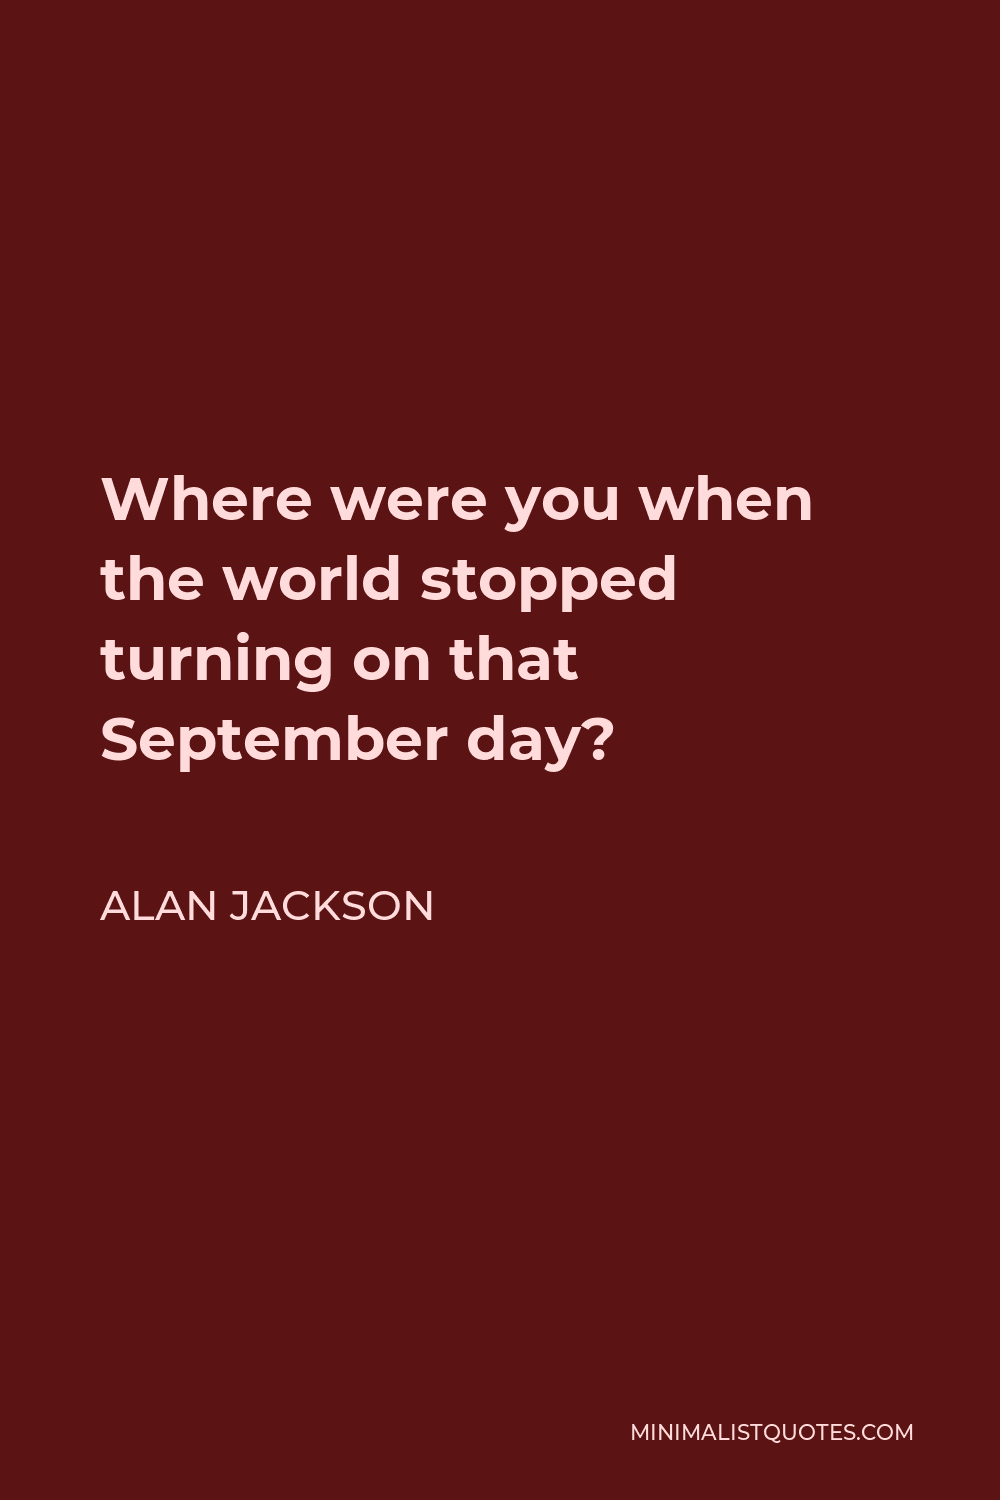 Alan Jackson Quote - Where were you when the world stopped turning on that September day?